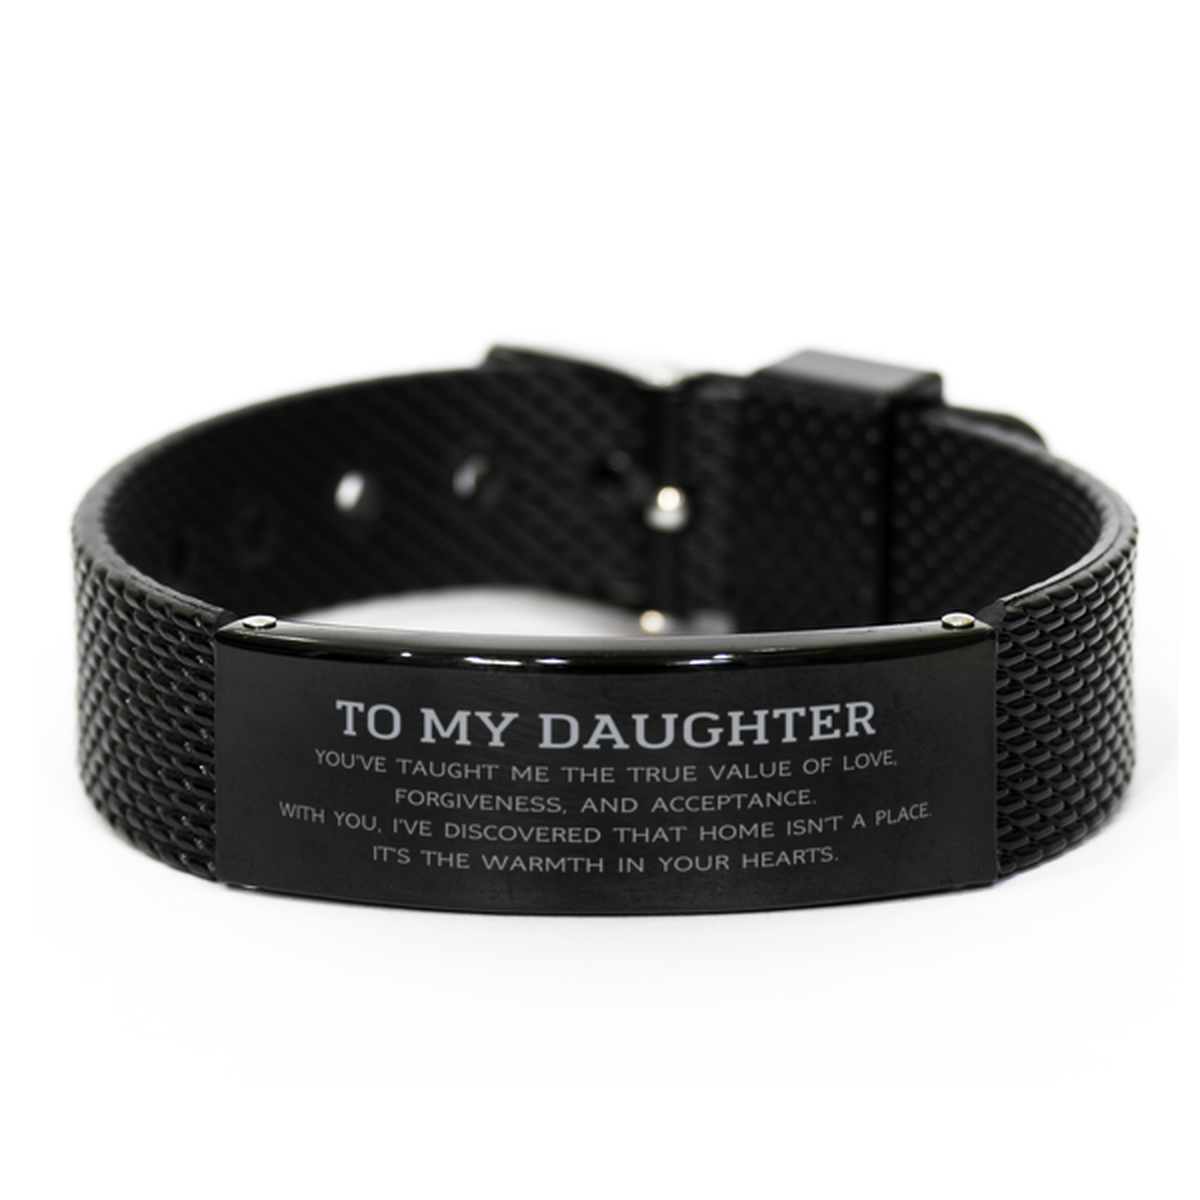 To My Daughter Gifts, You've taught me the true value of love, Thank You Gifts For Daughter, Birthday Black Shark Mesh Bracelet For Daughter